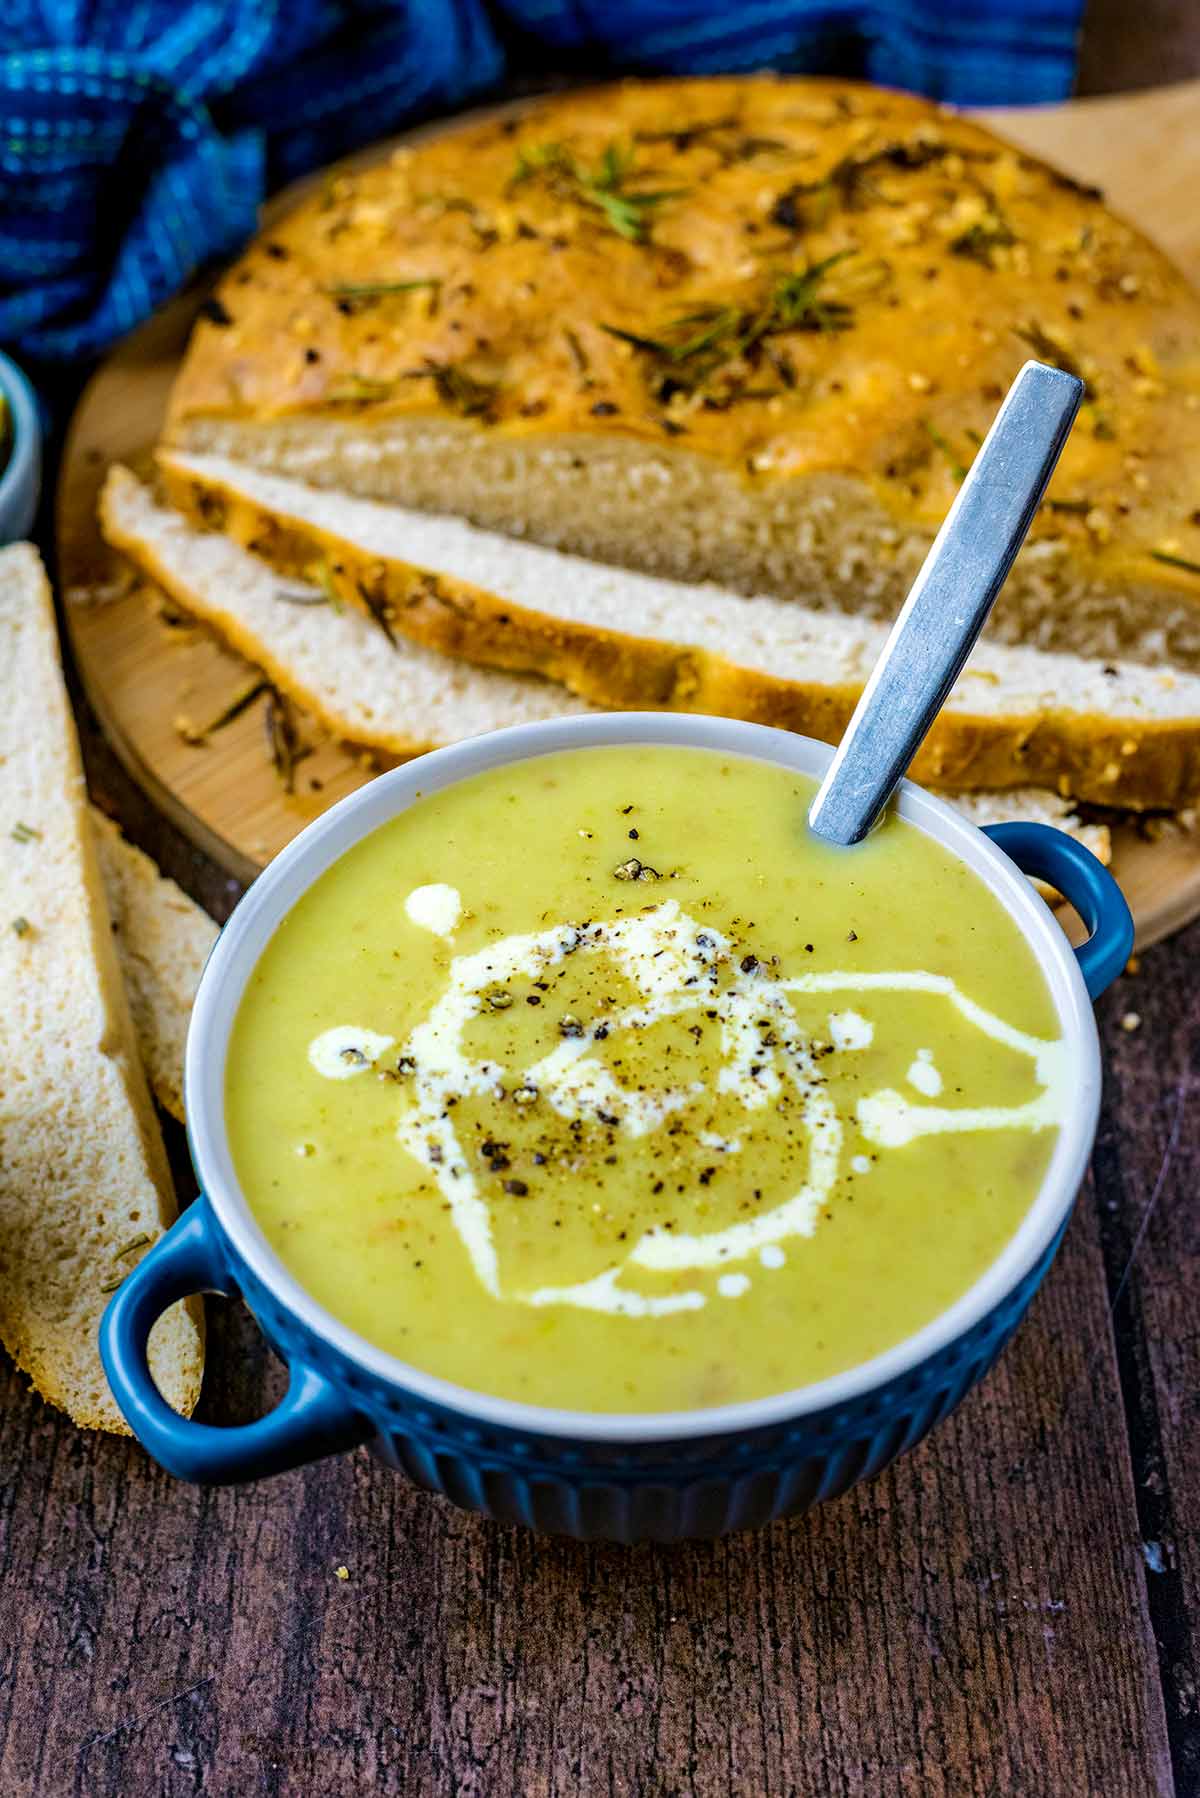 A bowl of leek and potato soup in front of some sliced bread.